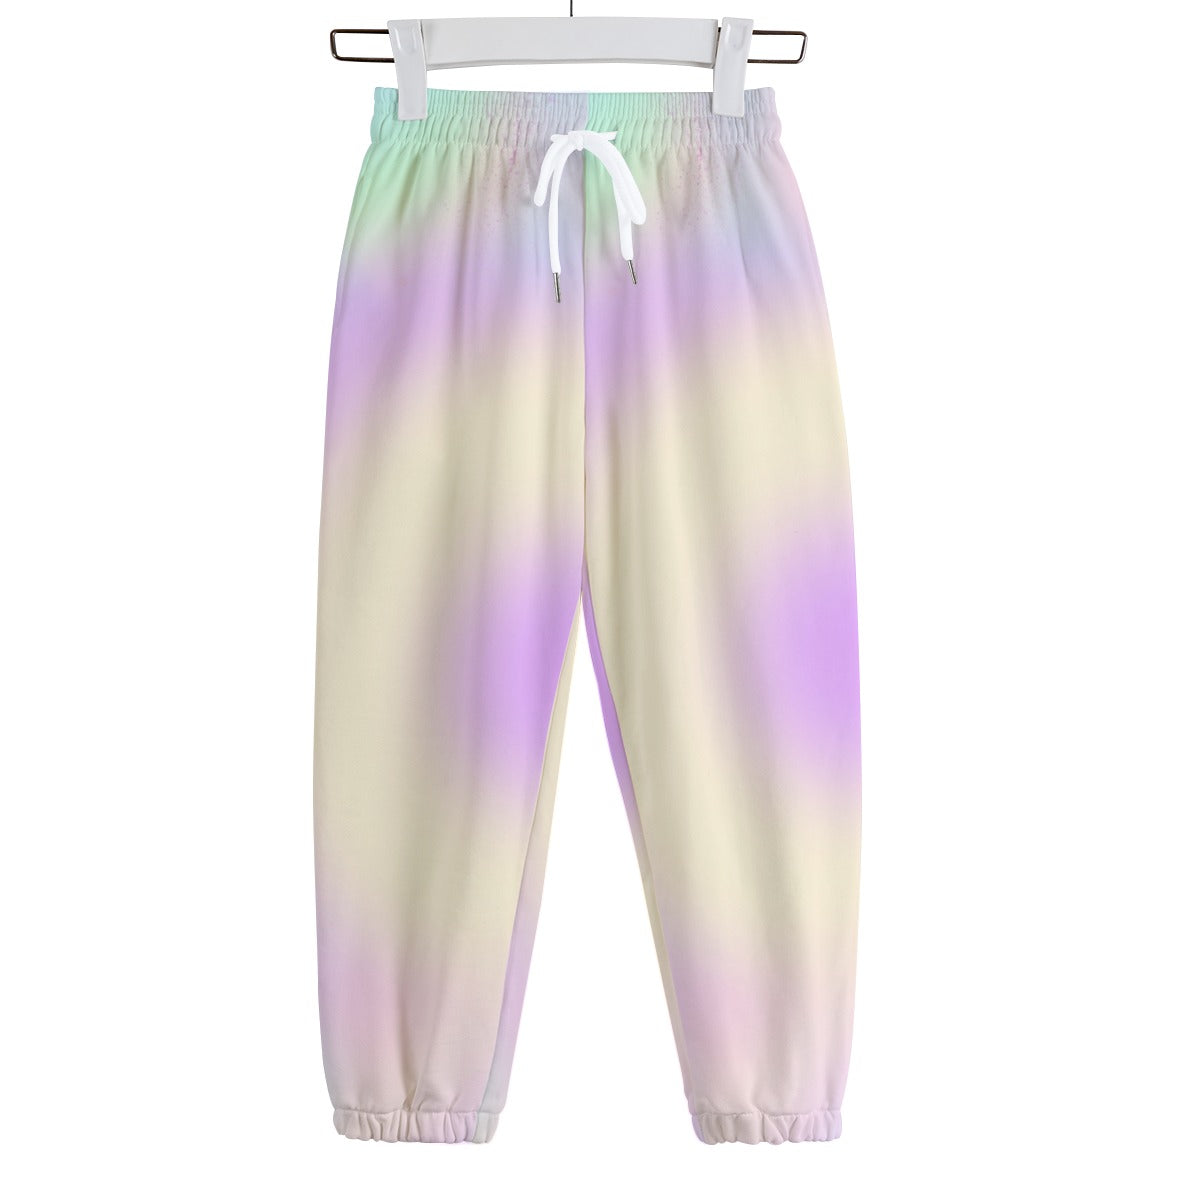 multi-colored - Cotton Candy Prism Girl's Sweatpants | 100% Cotton - girls pants at TFC&H Co.